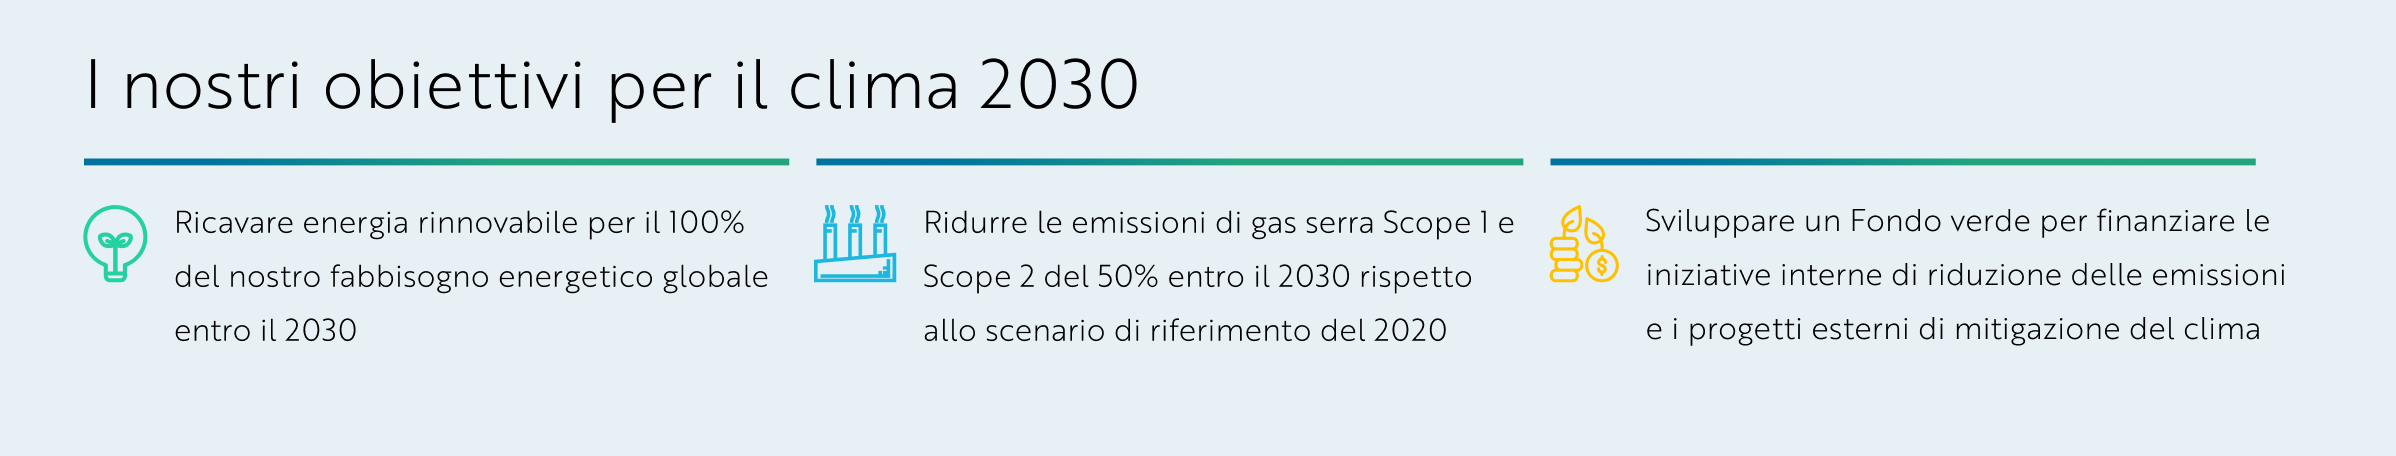 IT Translation Our 2030 Climate Goals Graphics